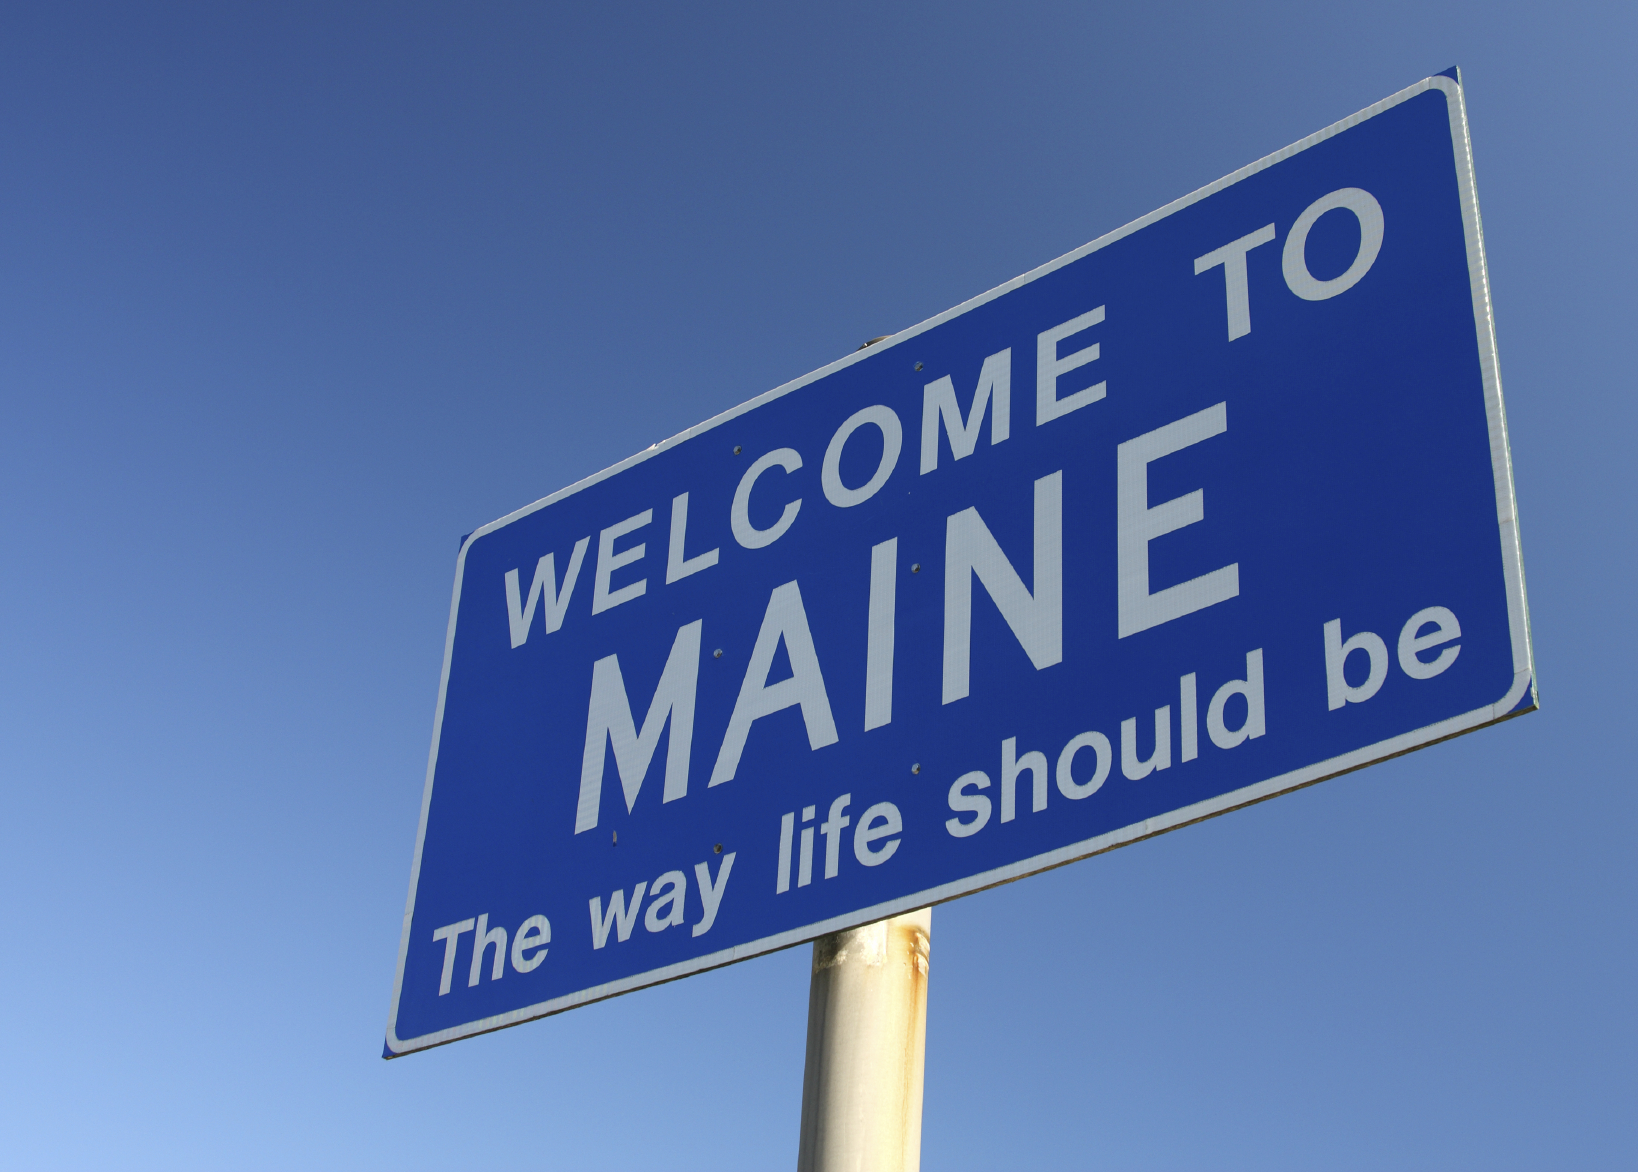 Maine Bill would Legalize Marijuana, Effectively Nullify Federal Prohibition